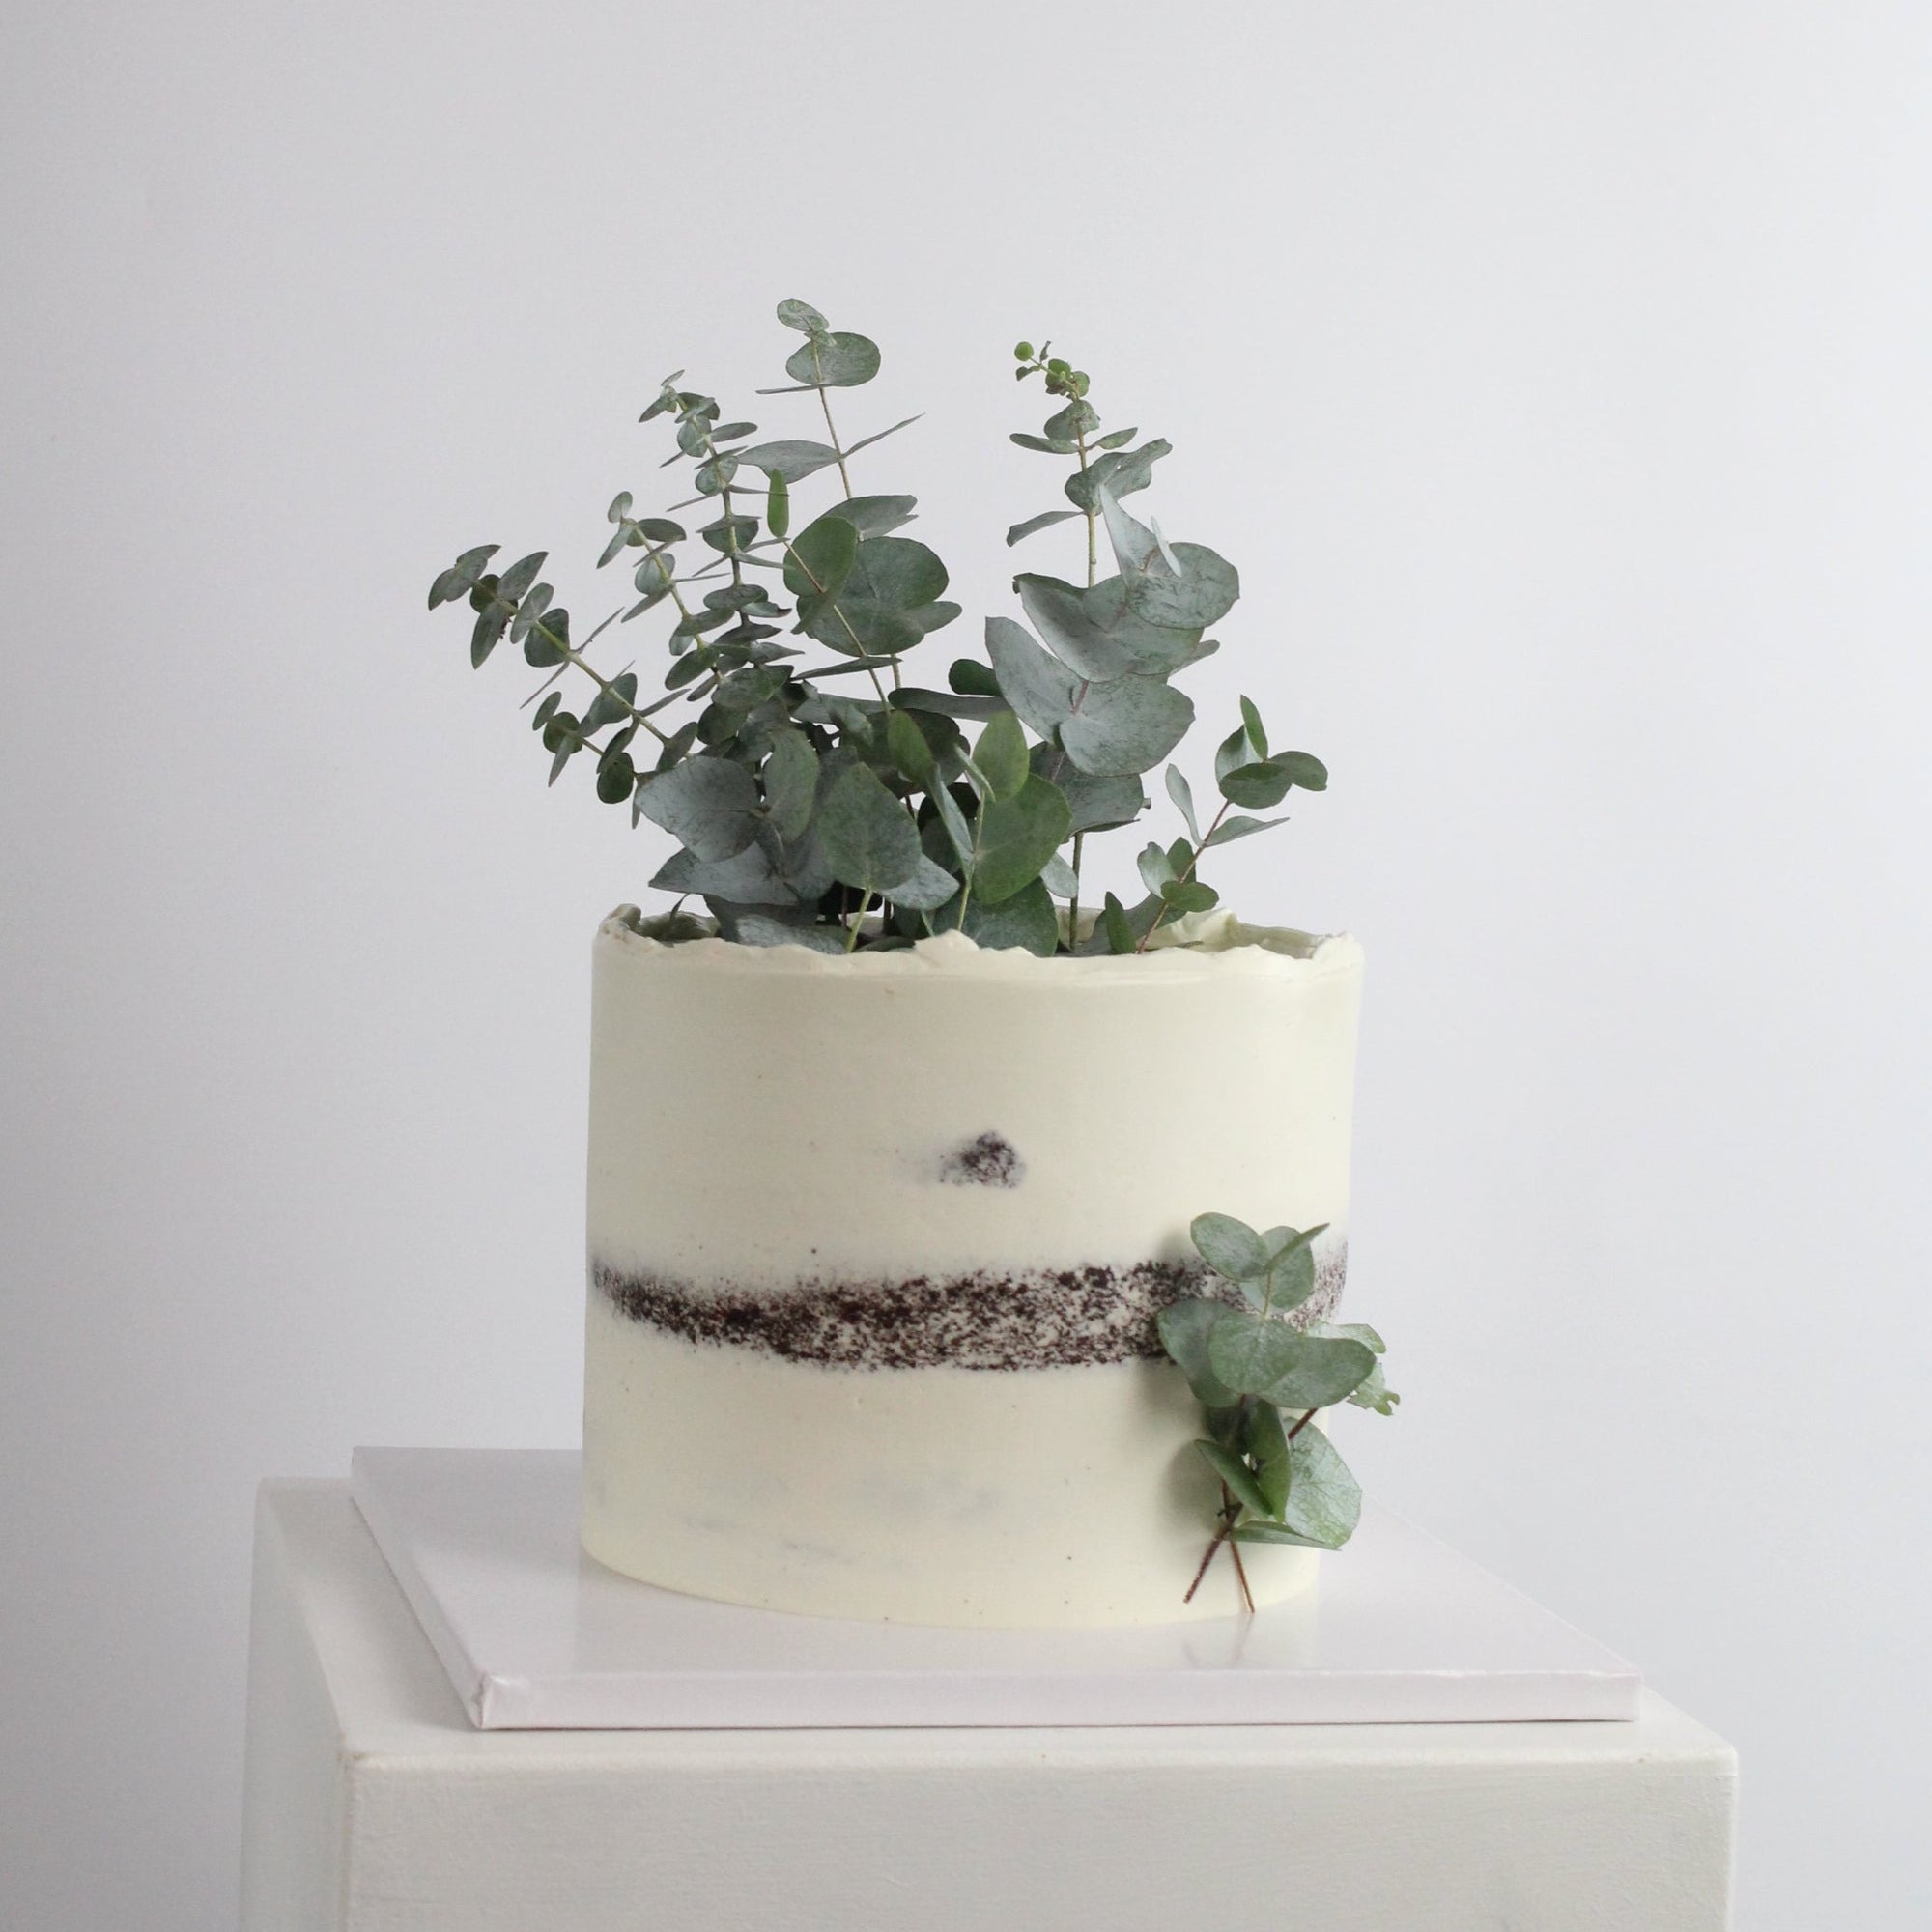 Forest Fairy Cake - Our signature semi-naked style adorned with your favorite greens!